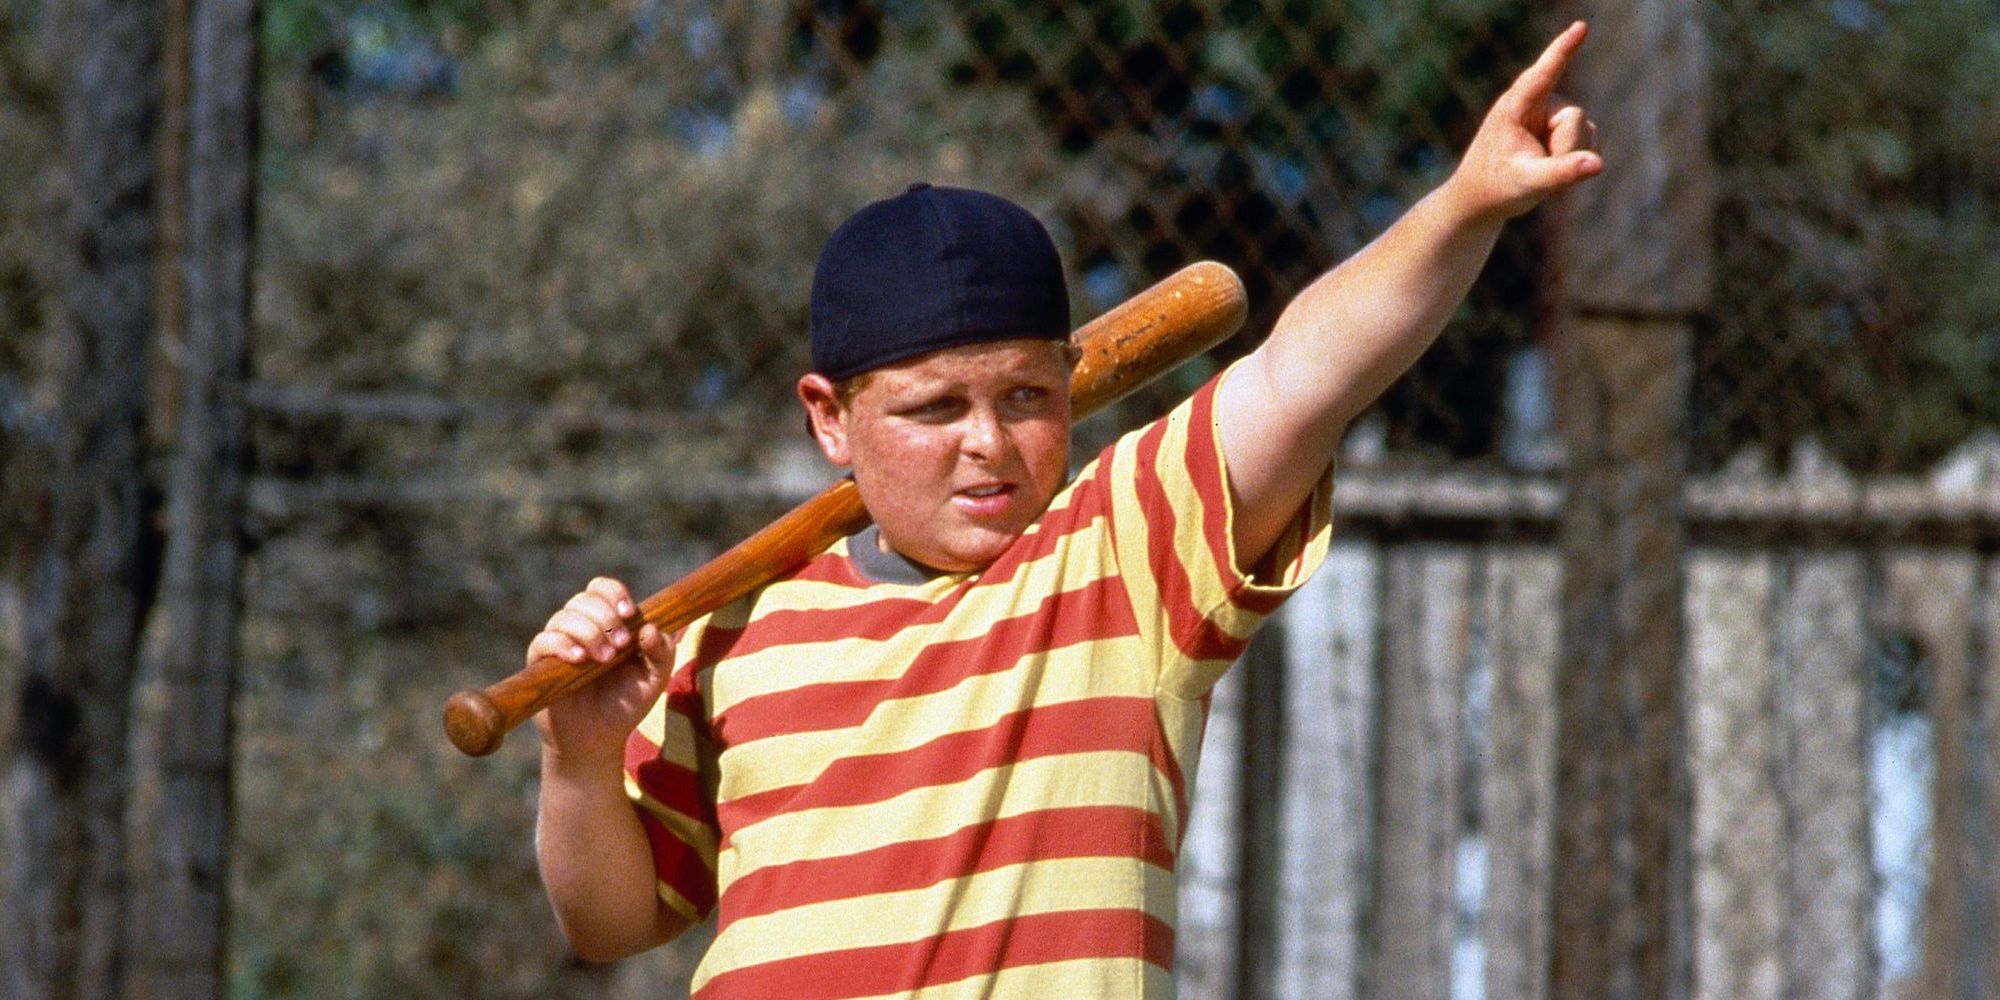 Ham batting in The Sandlot with an arm up